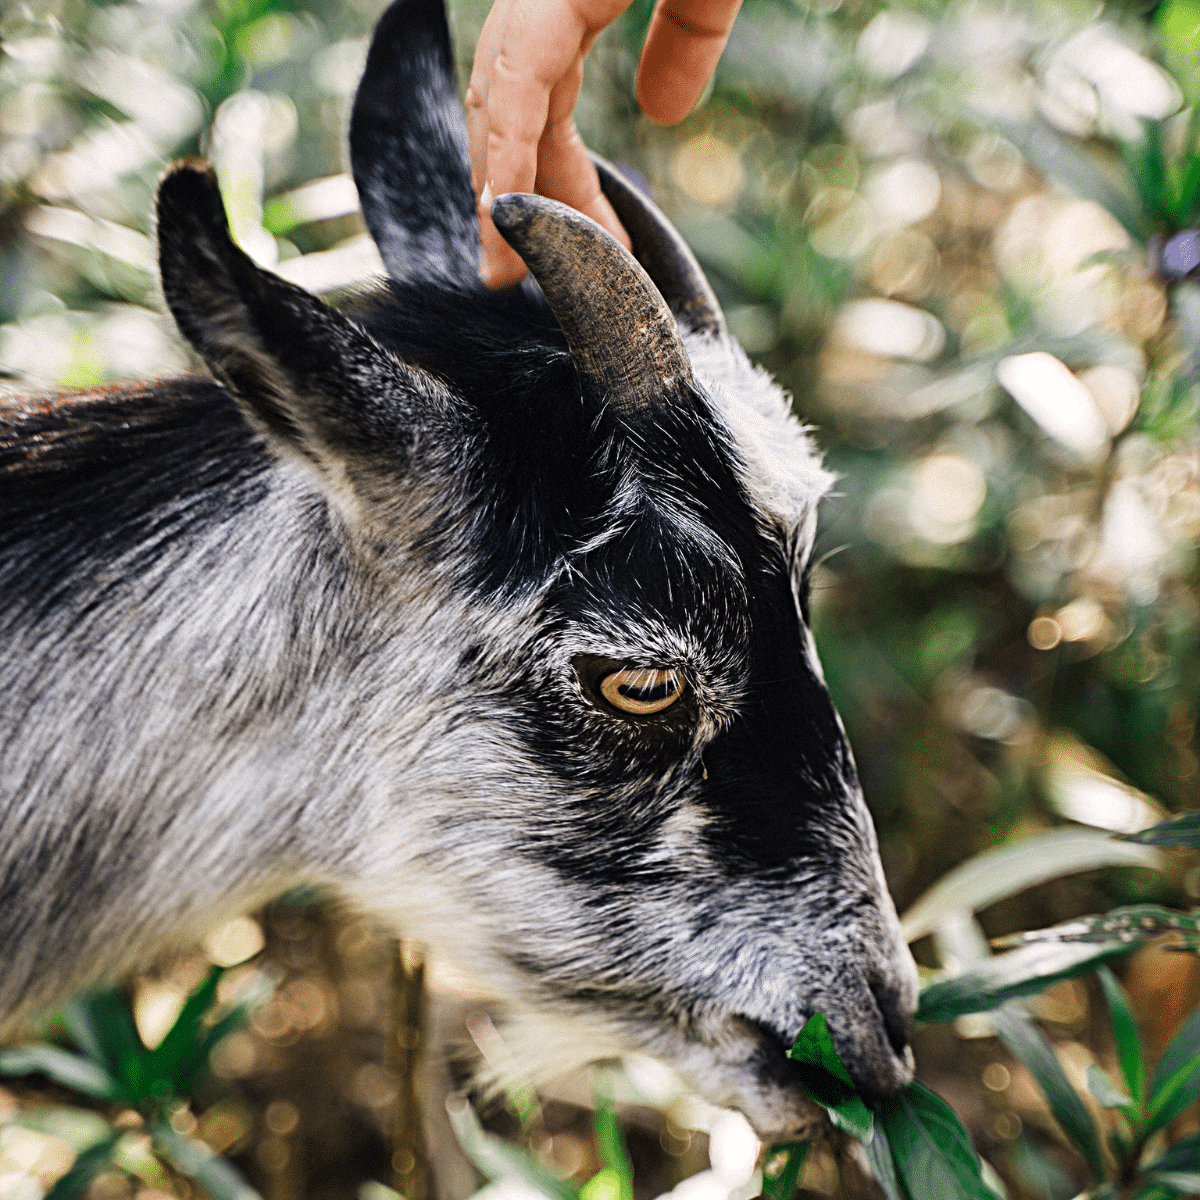 vertical photo showing a horned black and white goat being petted on it's head. The background is blurred foliage